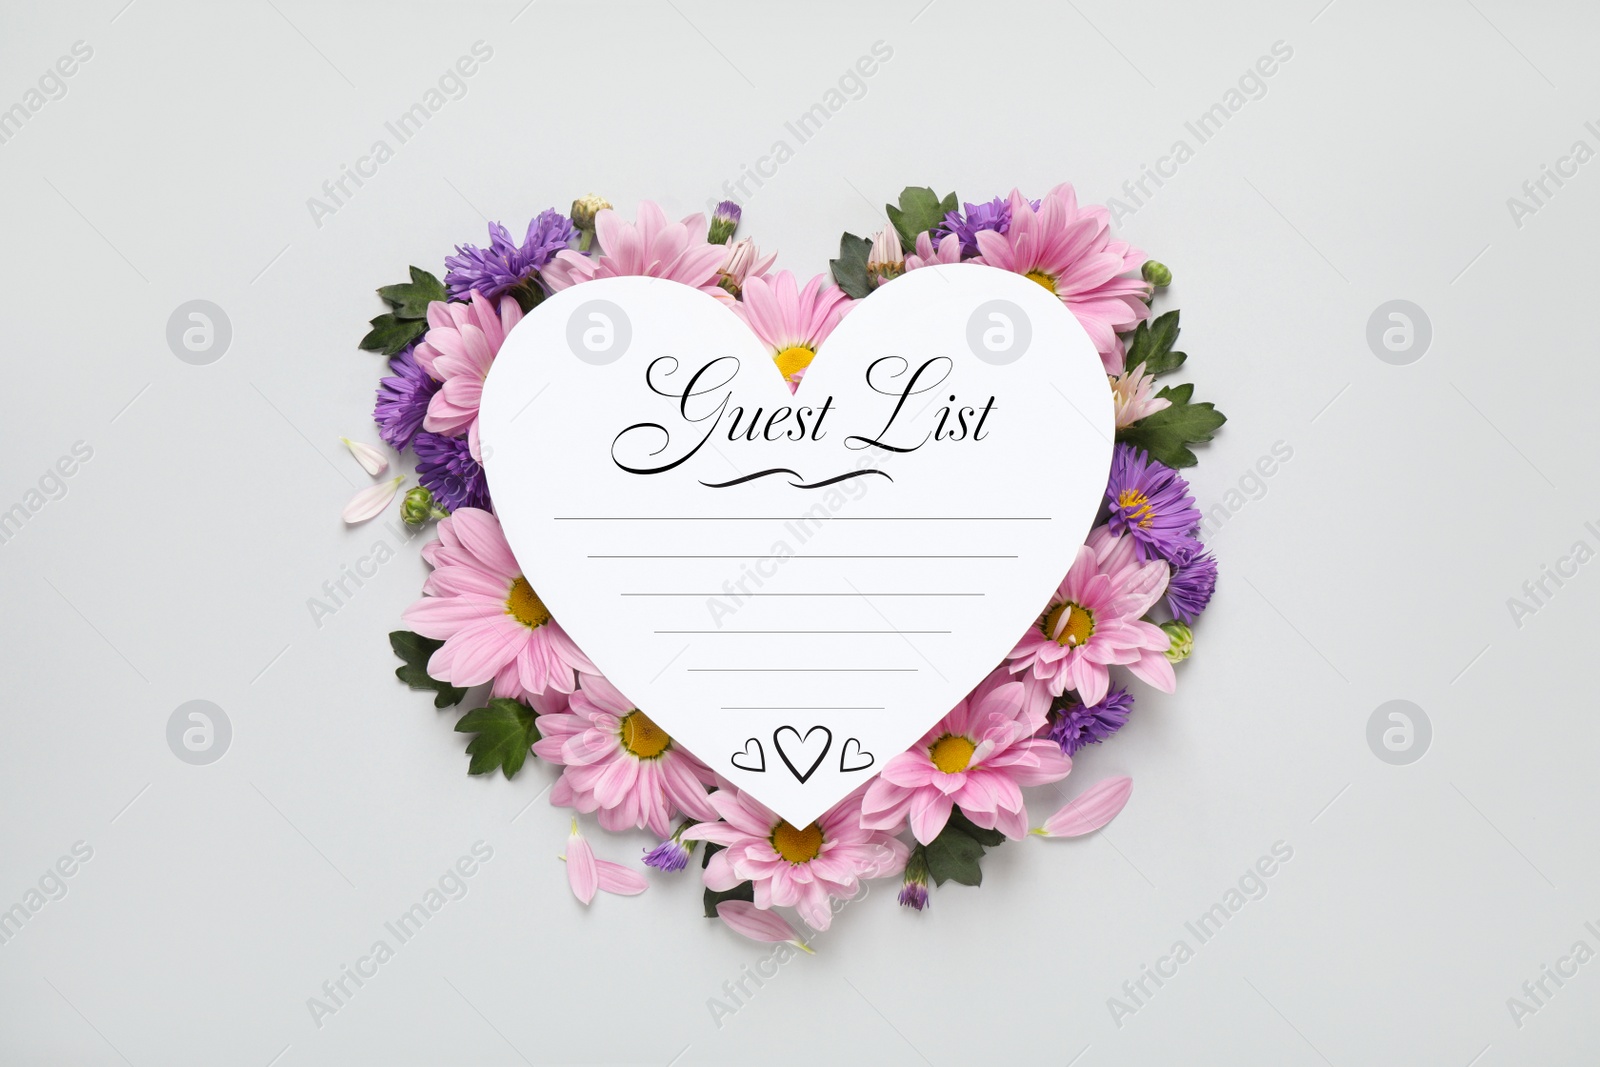 Image of Beautiful flowers and guest list on white background, top view